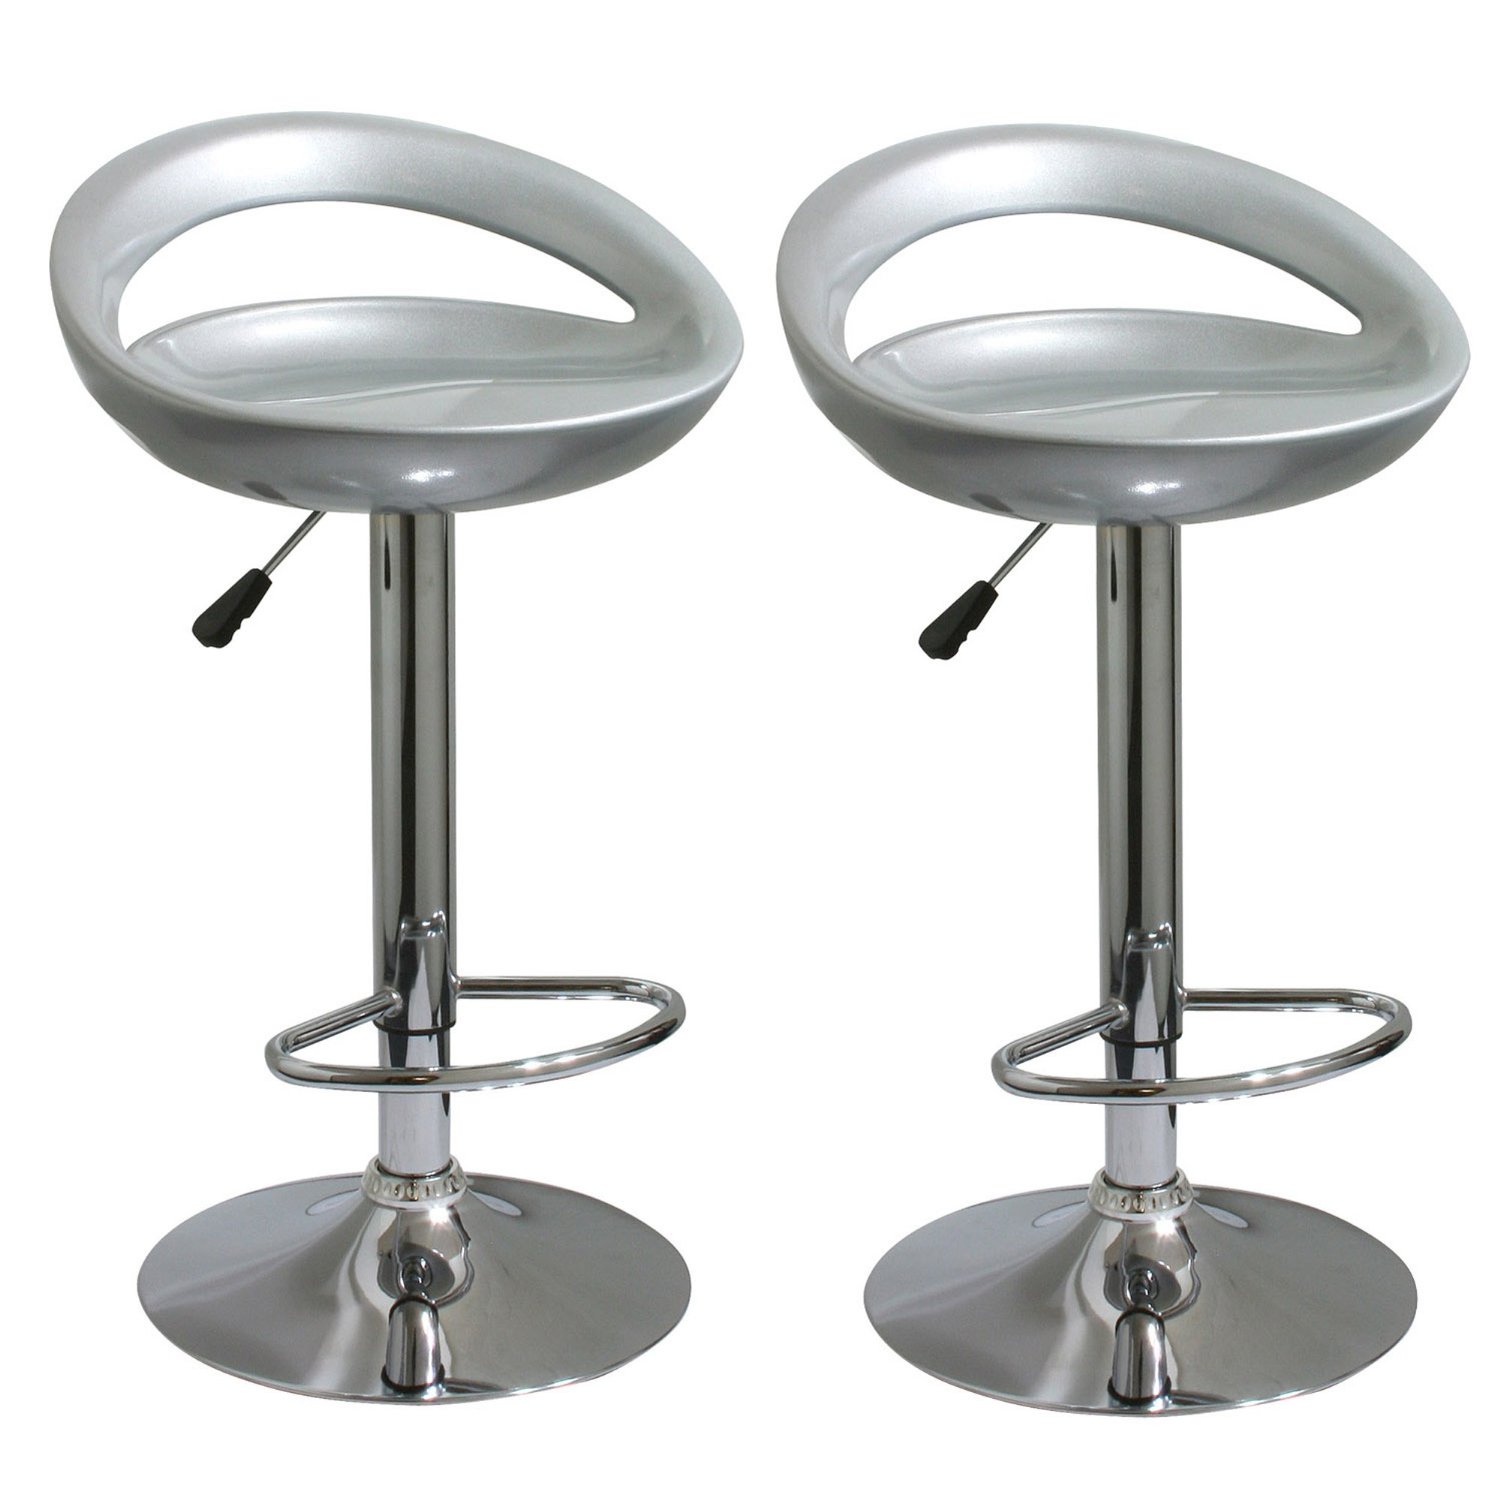 36 Outdoor Bar Stools Spora Ws, Bar Stools For 36 Inch Counter